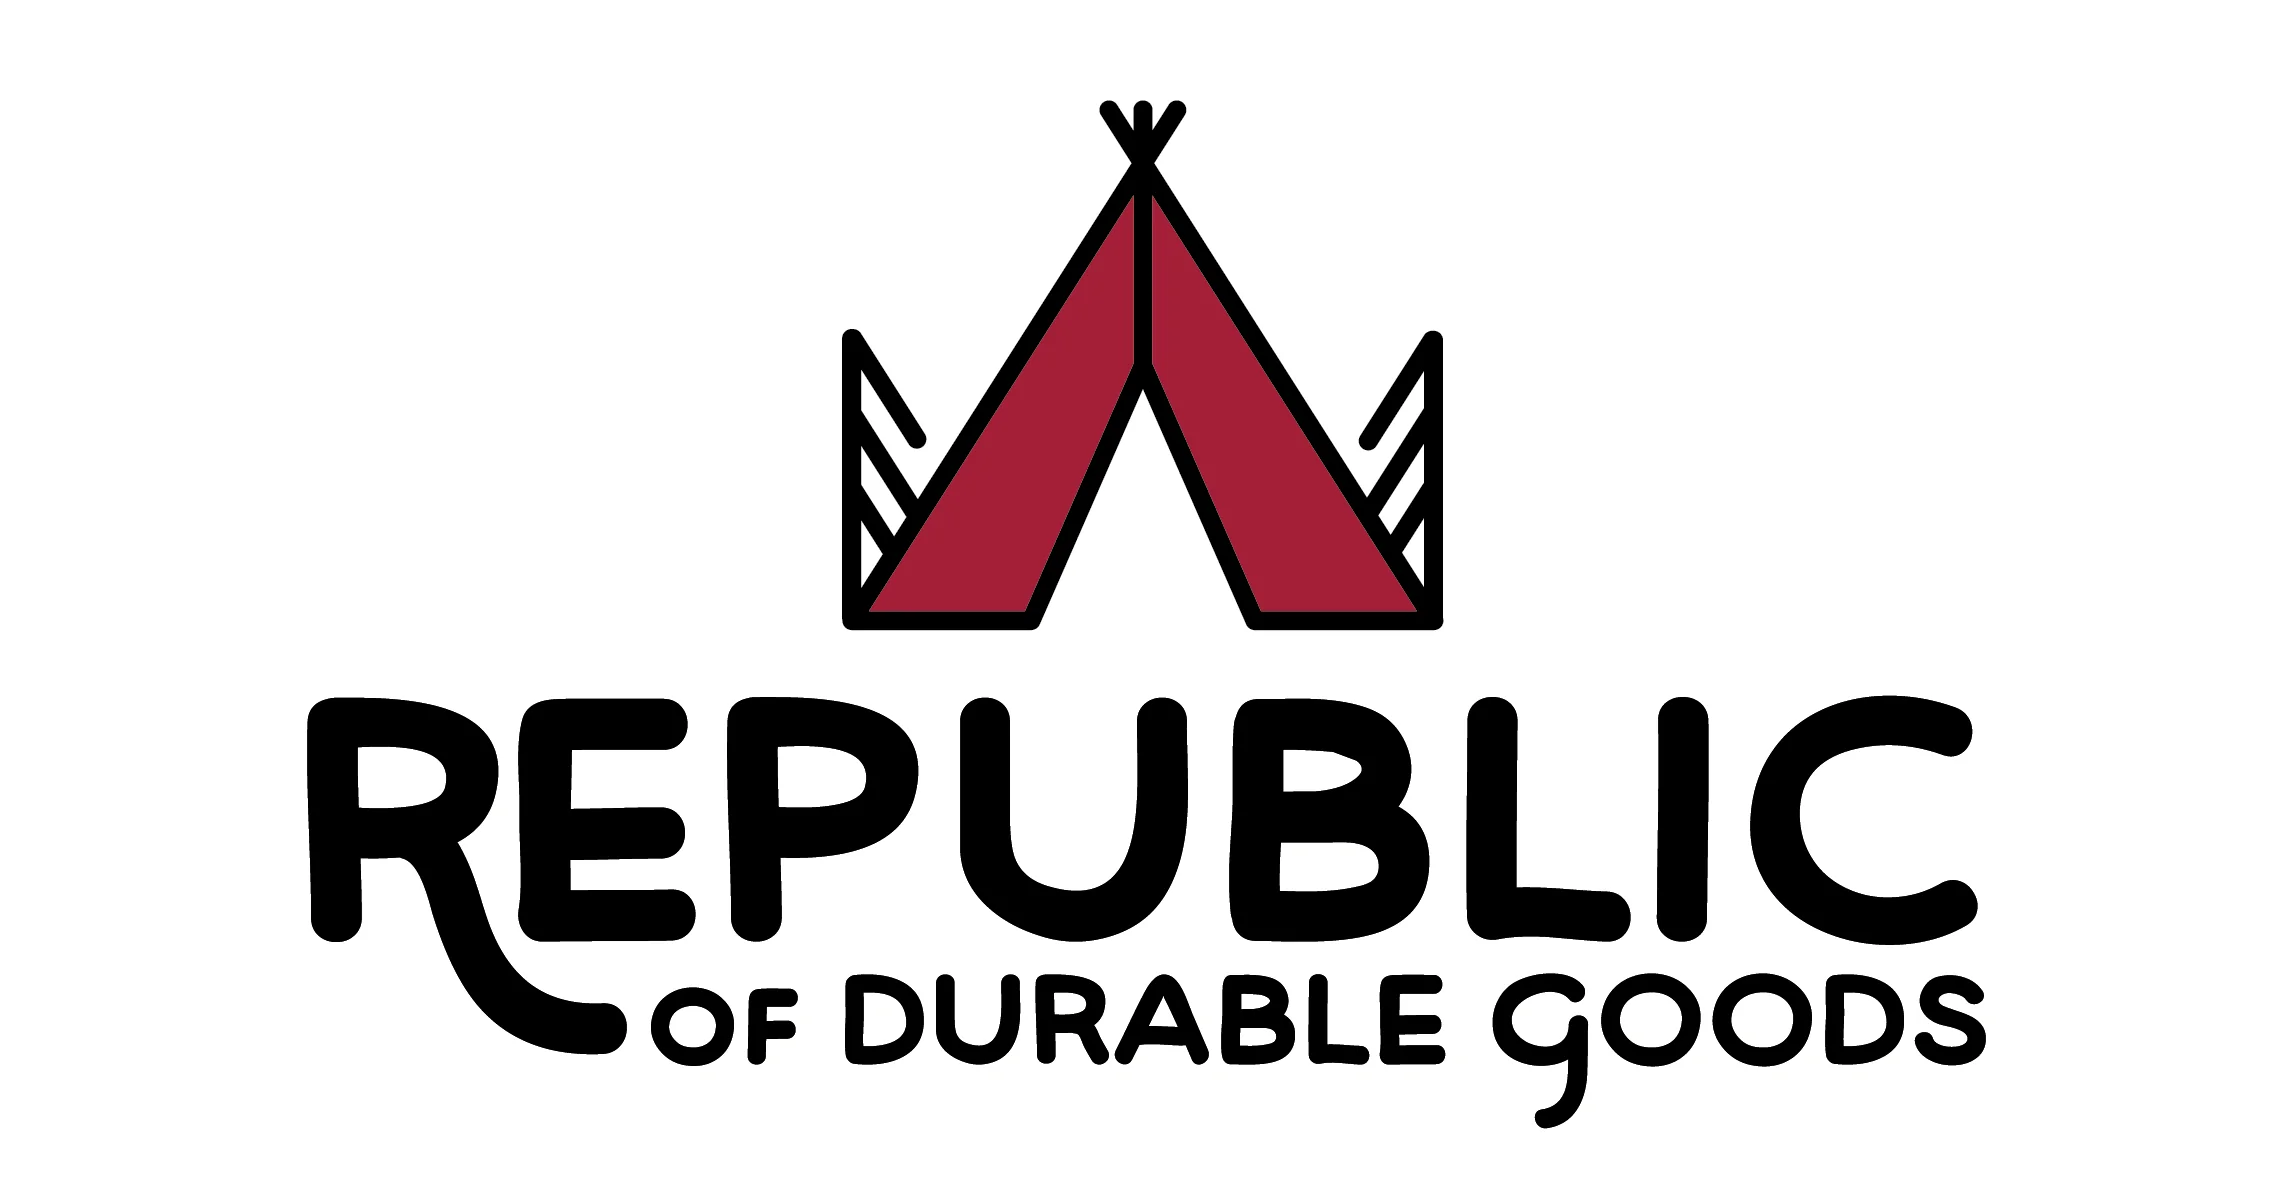 Republic of Durable Goods coupon codes, promo codes and deals